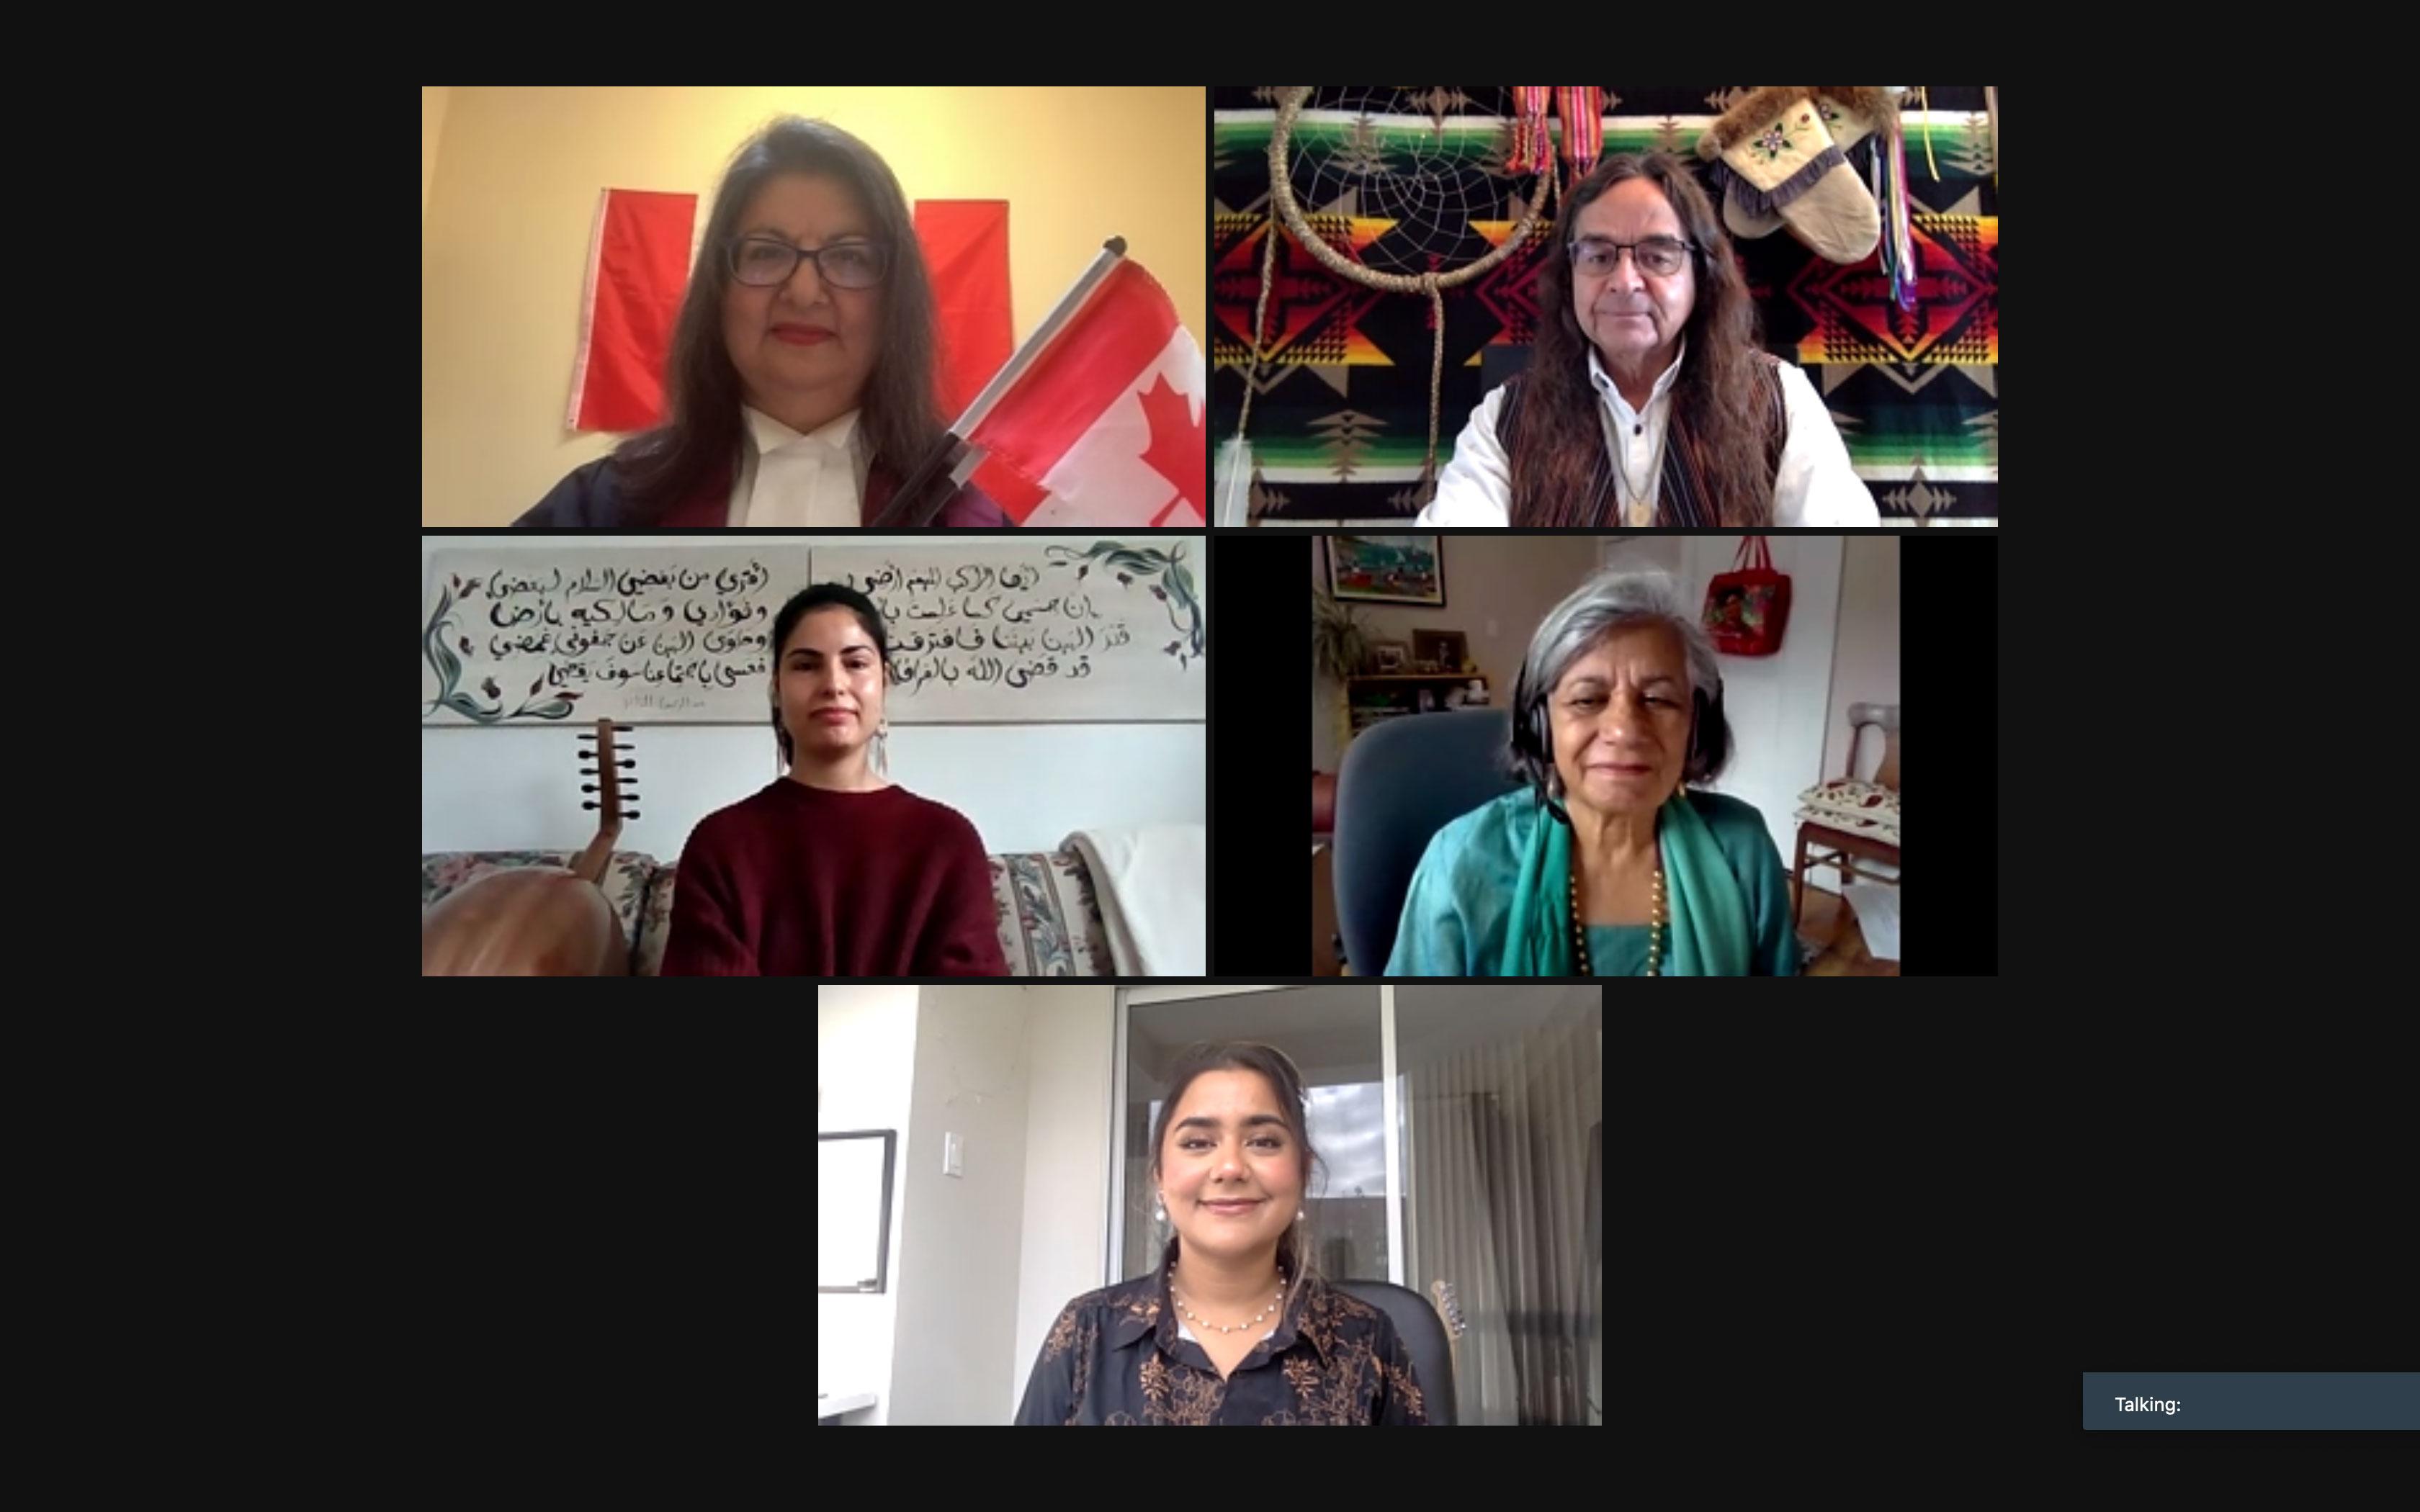 Friday, October 22, 2021 – Senator Ratna Omidvar participates as keynote speaker at a virtual citizenship ceremony for new Canadians hosted by Immigration, Refugees and Citizenship Canada and the Institute for Canadian Citizenship.